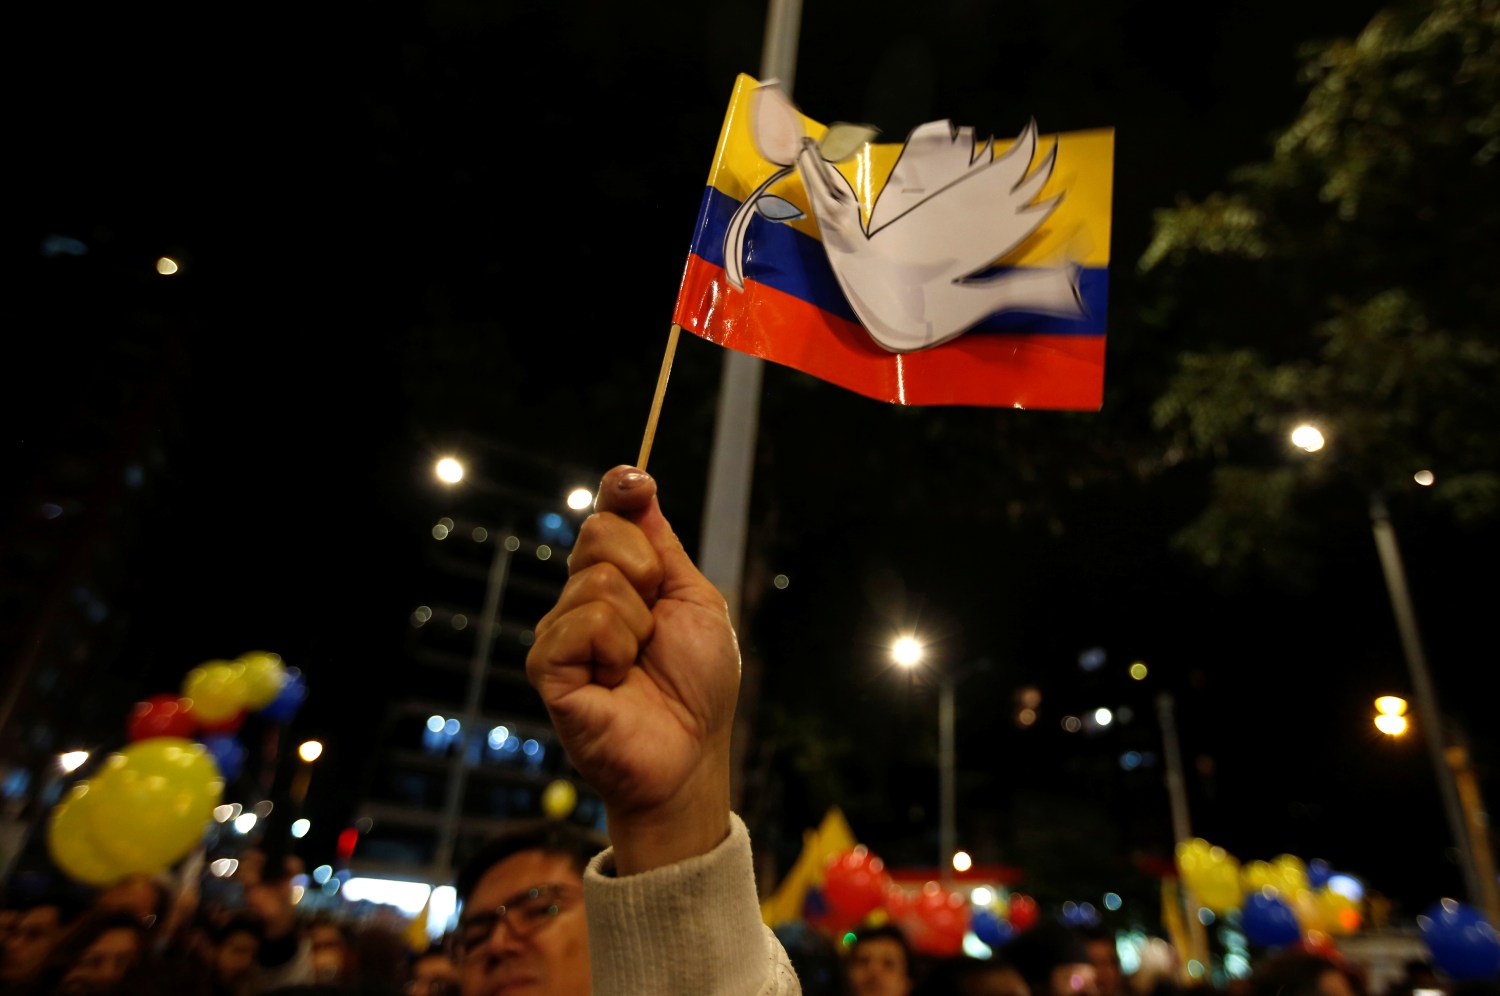 A man holds a Colombian flag after Colombia's government and Revolutionary Armed Forces of Colombia (FARC) rebels reached a final peace deal on Wednesday to end a five-decade war, in Bogota, Colombia, August 24, 2016. REUTERS/John Vizcaino - S1BETXJWAEAB